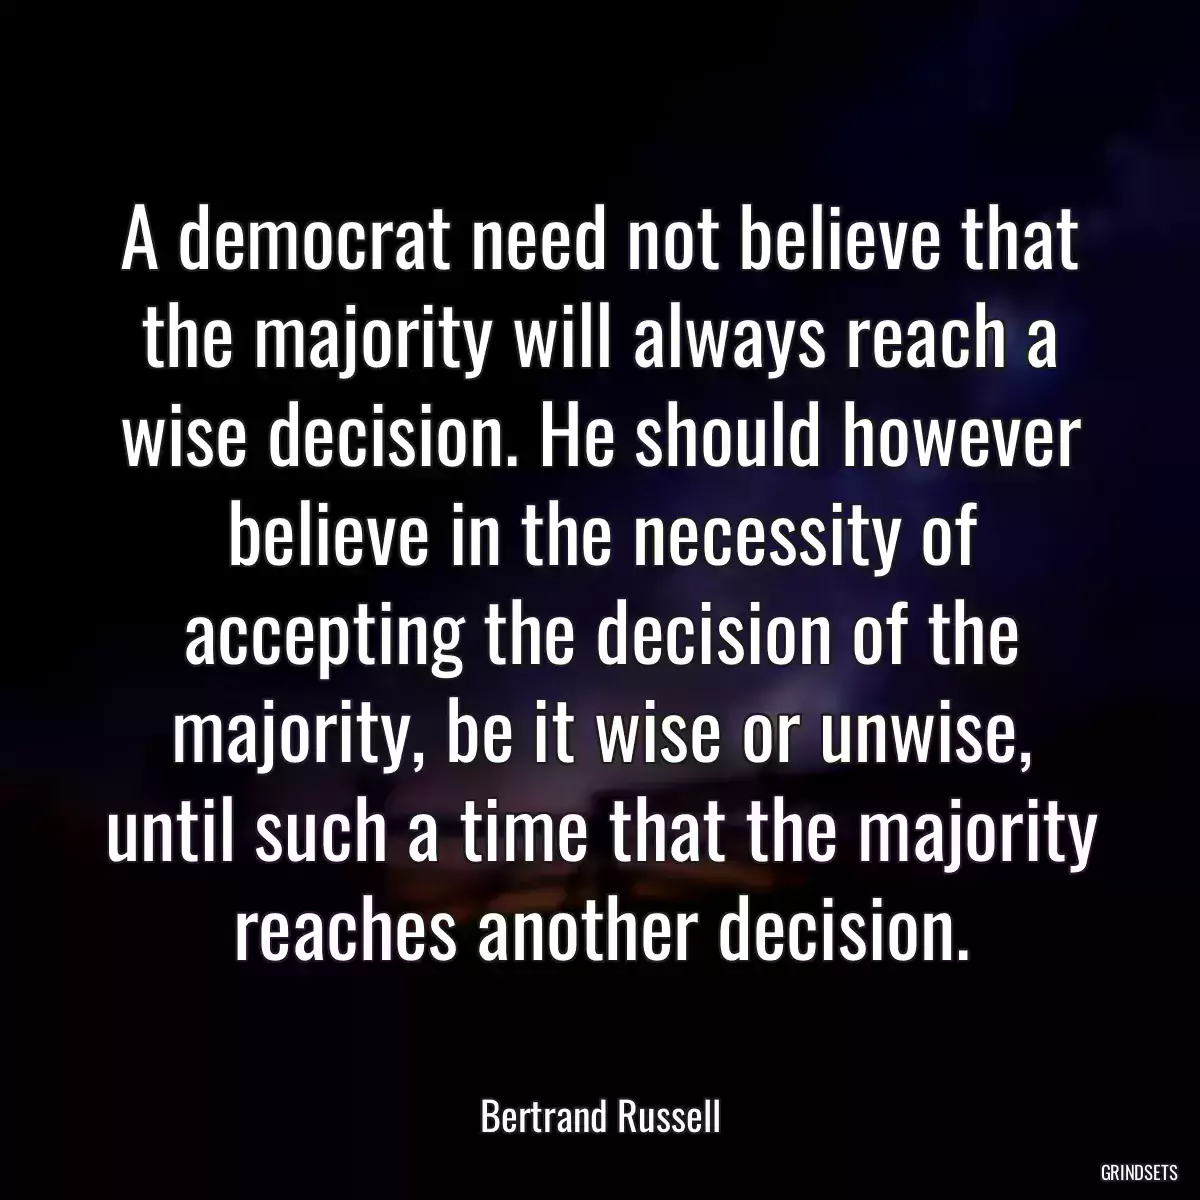 A democrat need not believe that the majority will always reach a wise decision. He should however believe in the necessity of accepting the decision of the majority, be it wise or unwise, until such a time that the majority reaches another decision.